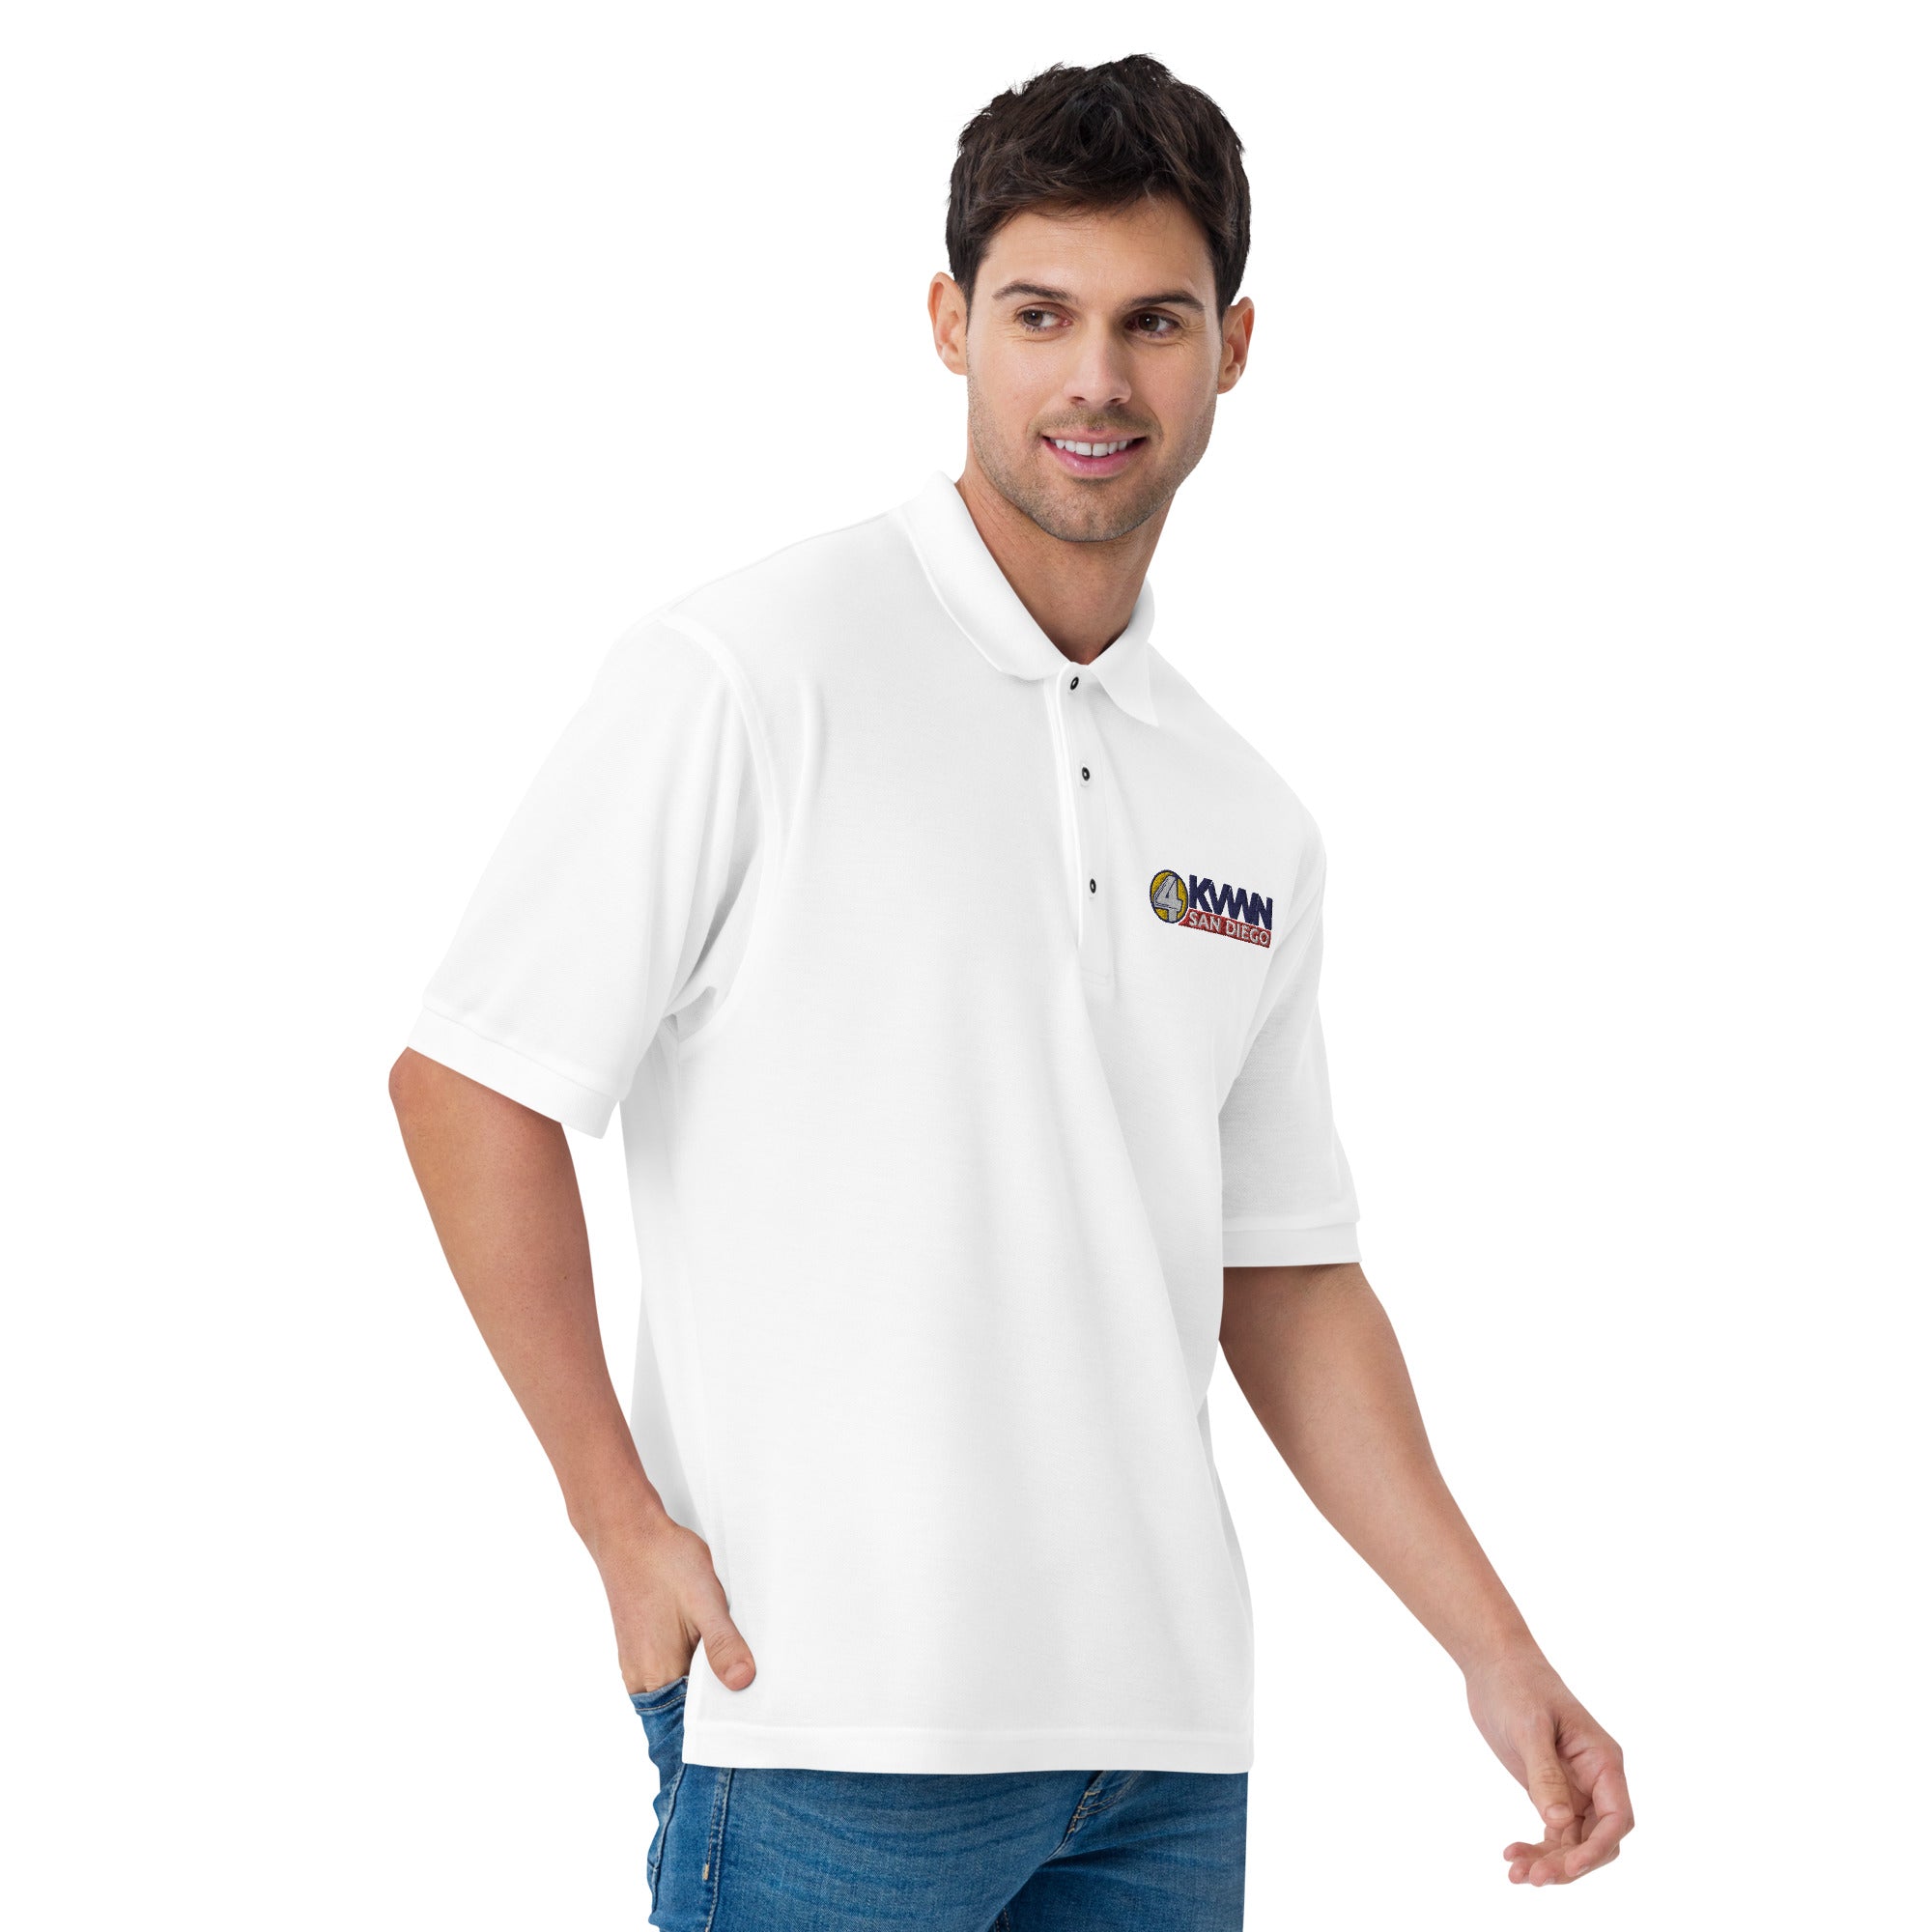 KVWN Channel 4 Anchorman Embroidered Men's Polo